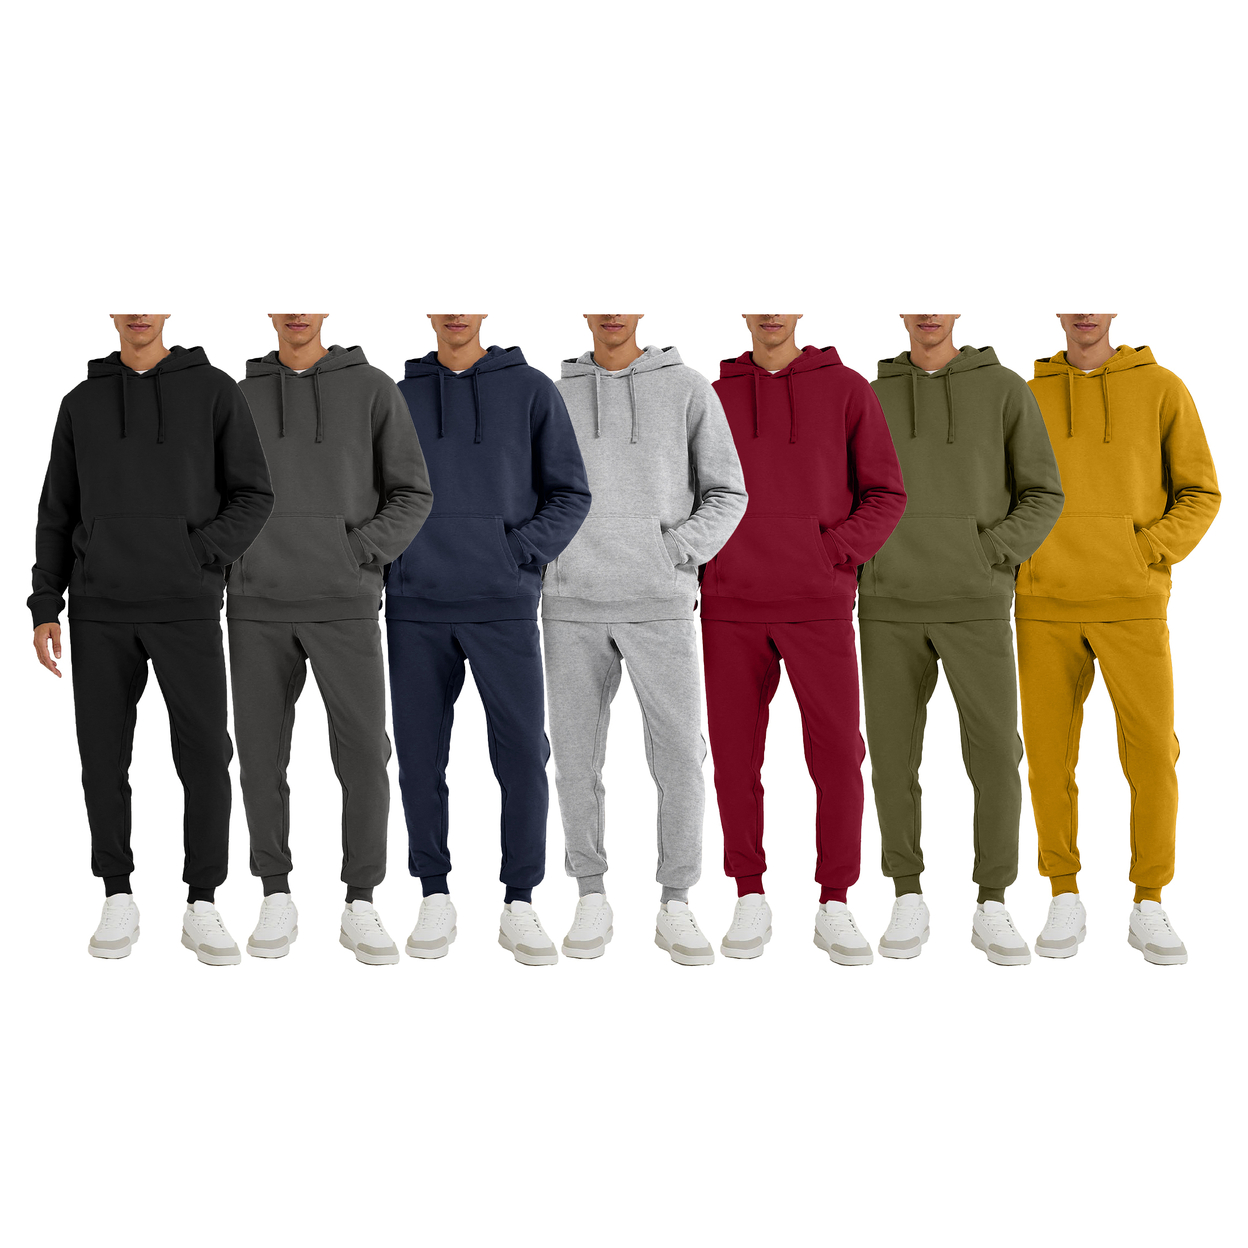 Multi-Pack: Men's Big & Tall Athletic Active Jogging Winter Warm Fleece Lined Pullover Tracksuit Set - Charcoal, 1-pack, Xx-large